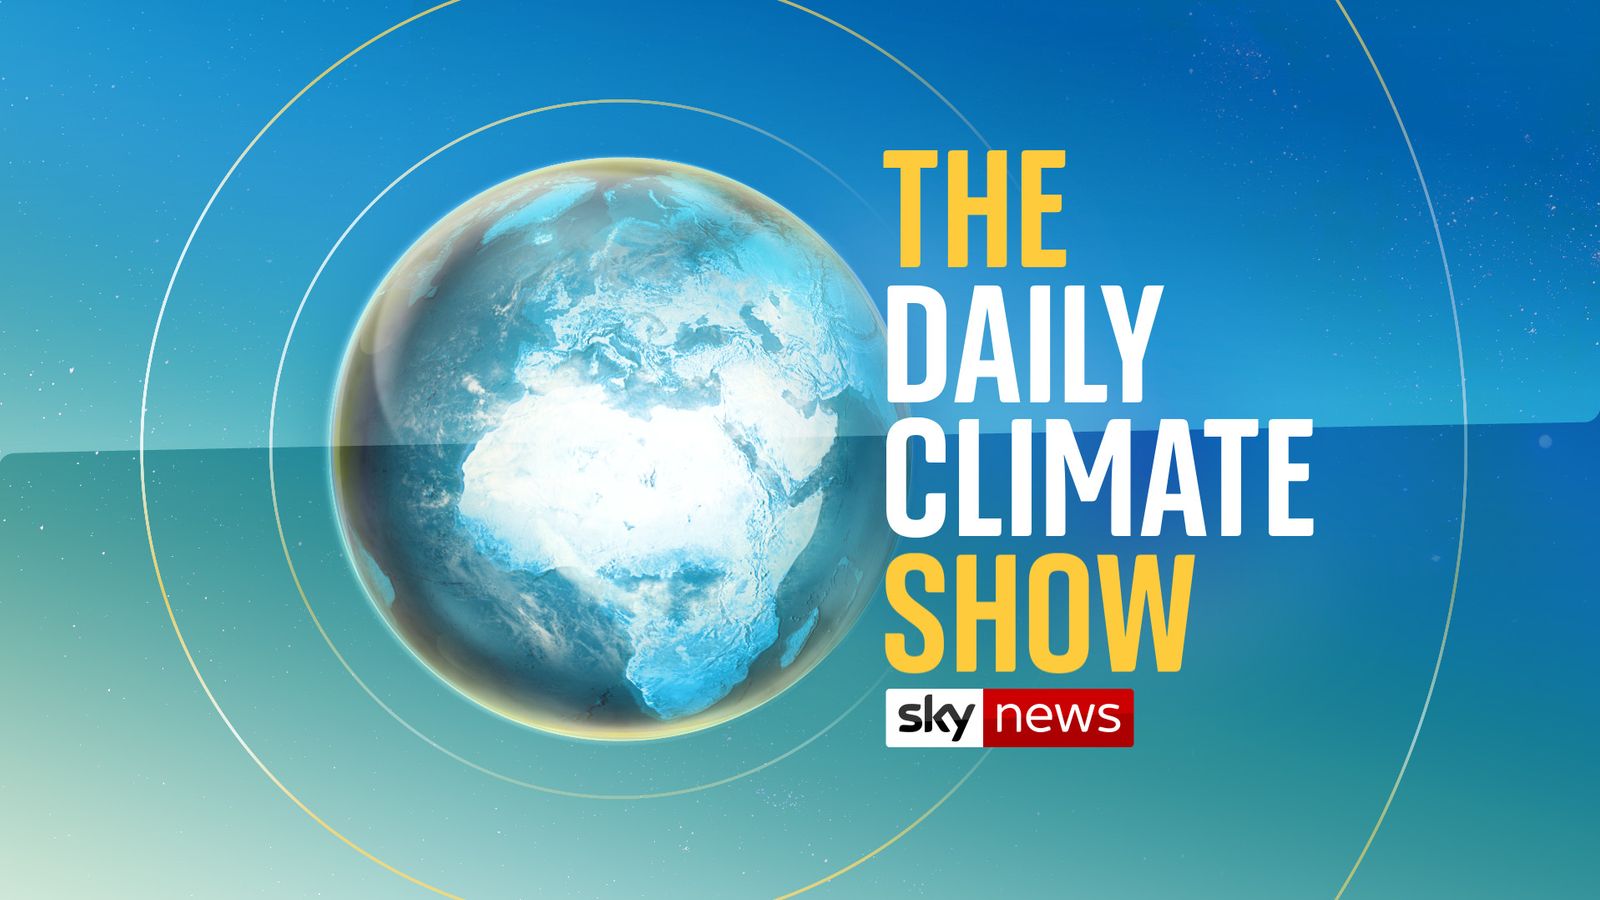 The Daily Climate Show: Sky News launches prime time programme dedicated to global crisis - Sky News